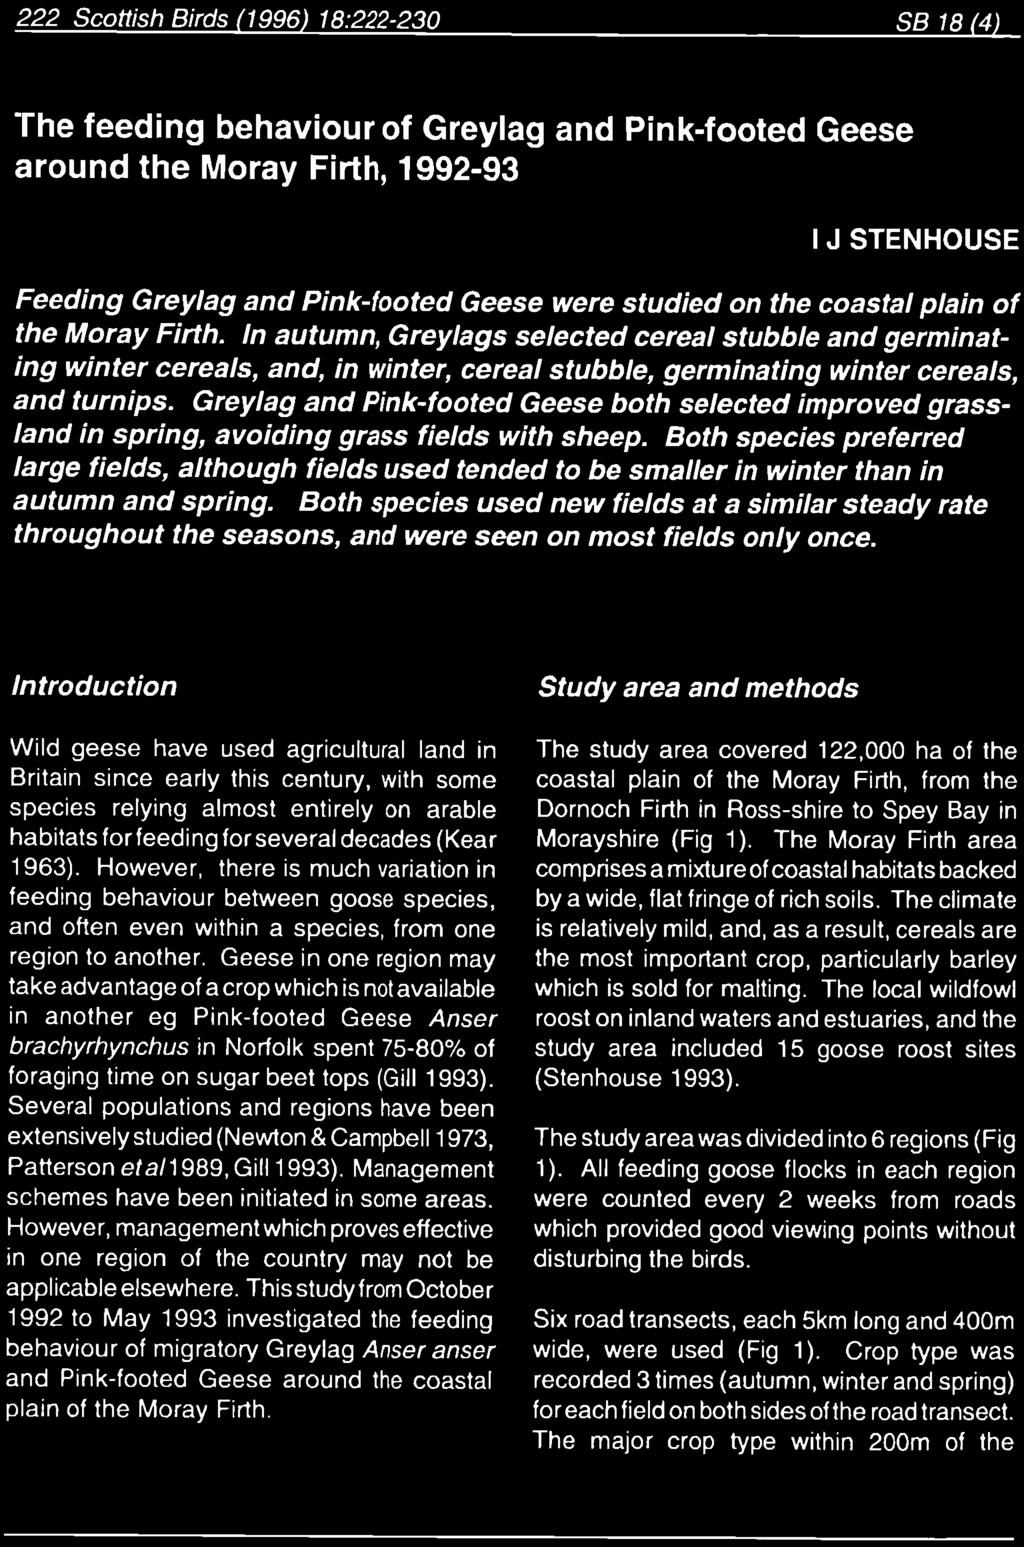 222 Scottish Birds (1996) 18:222-23 SB 18 (4) The feeding behaviour of Greylag and Pink-footed Geese around the Moray Firth, 1992-93 I J STENHOUSE Feeding Greylag and Pink-footed Geese were studied